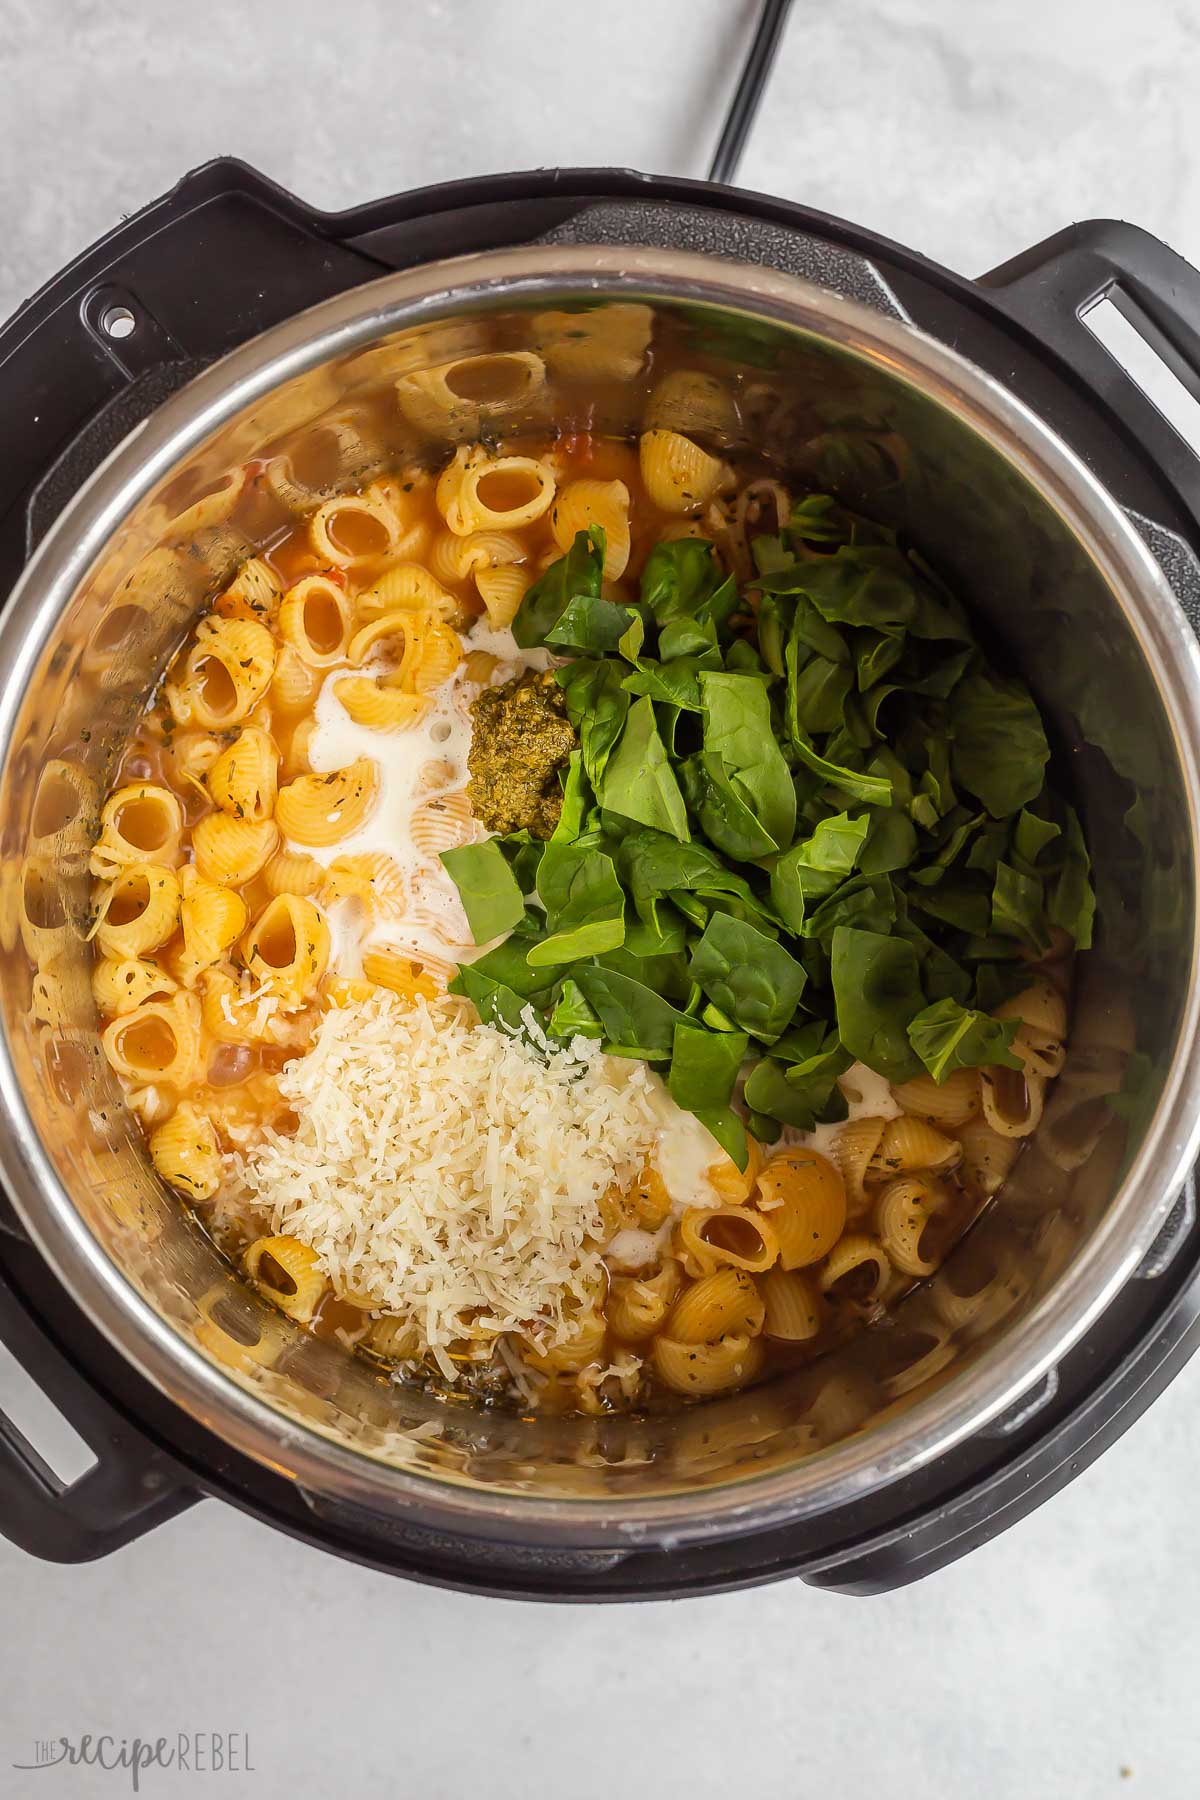 parmesan cream and spinach added to pasta in pressure cooker.